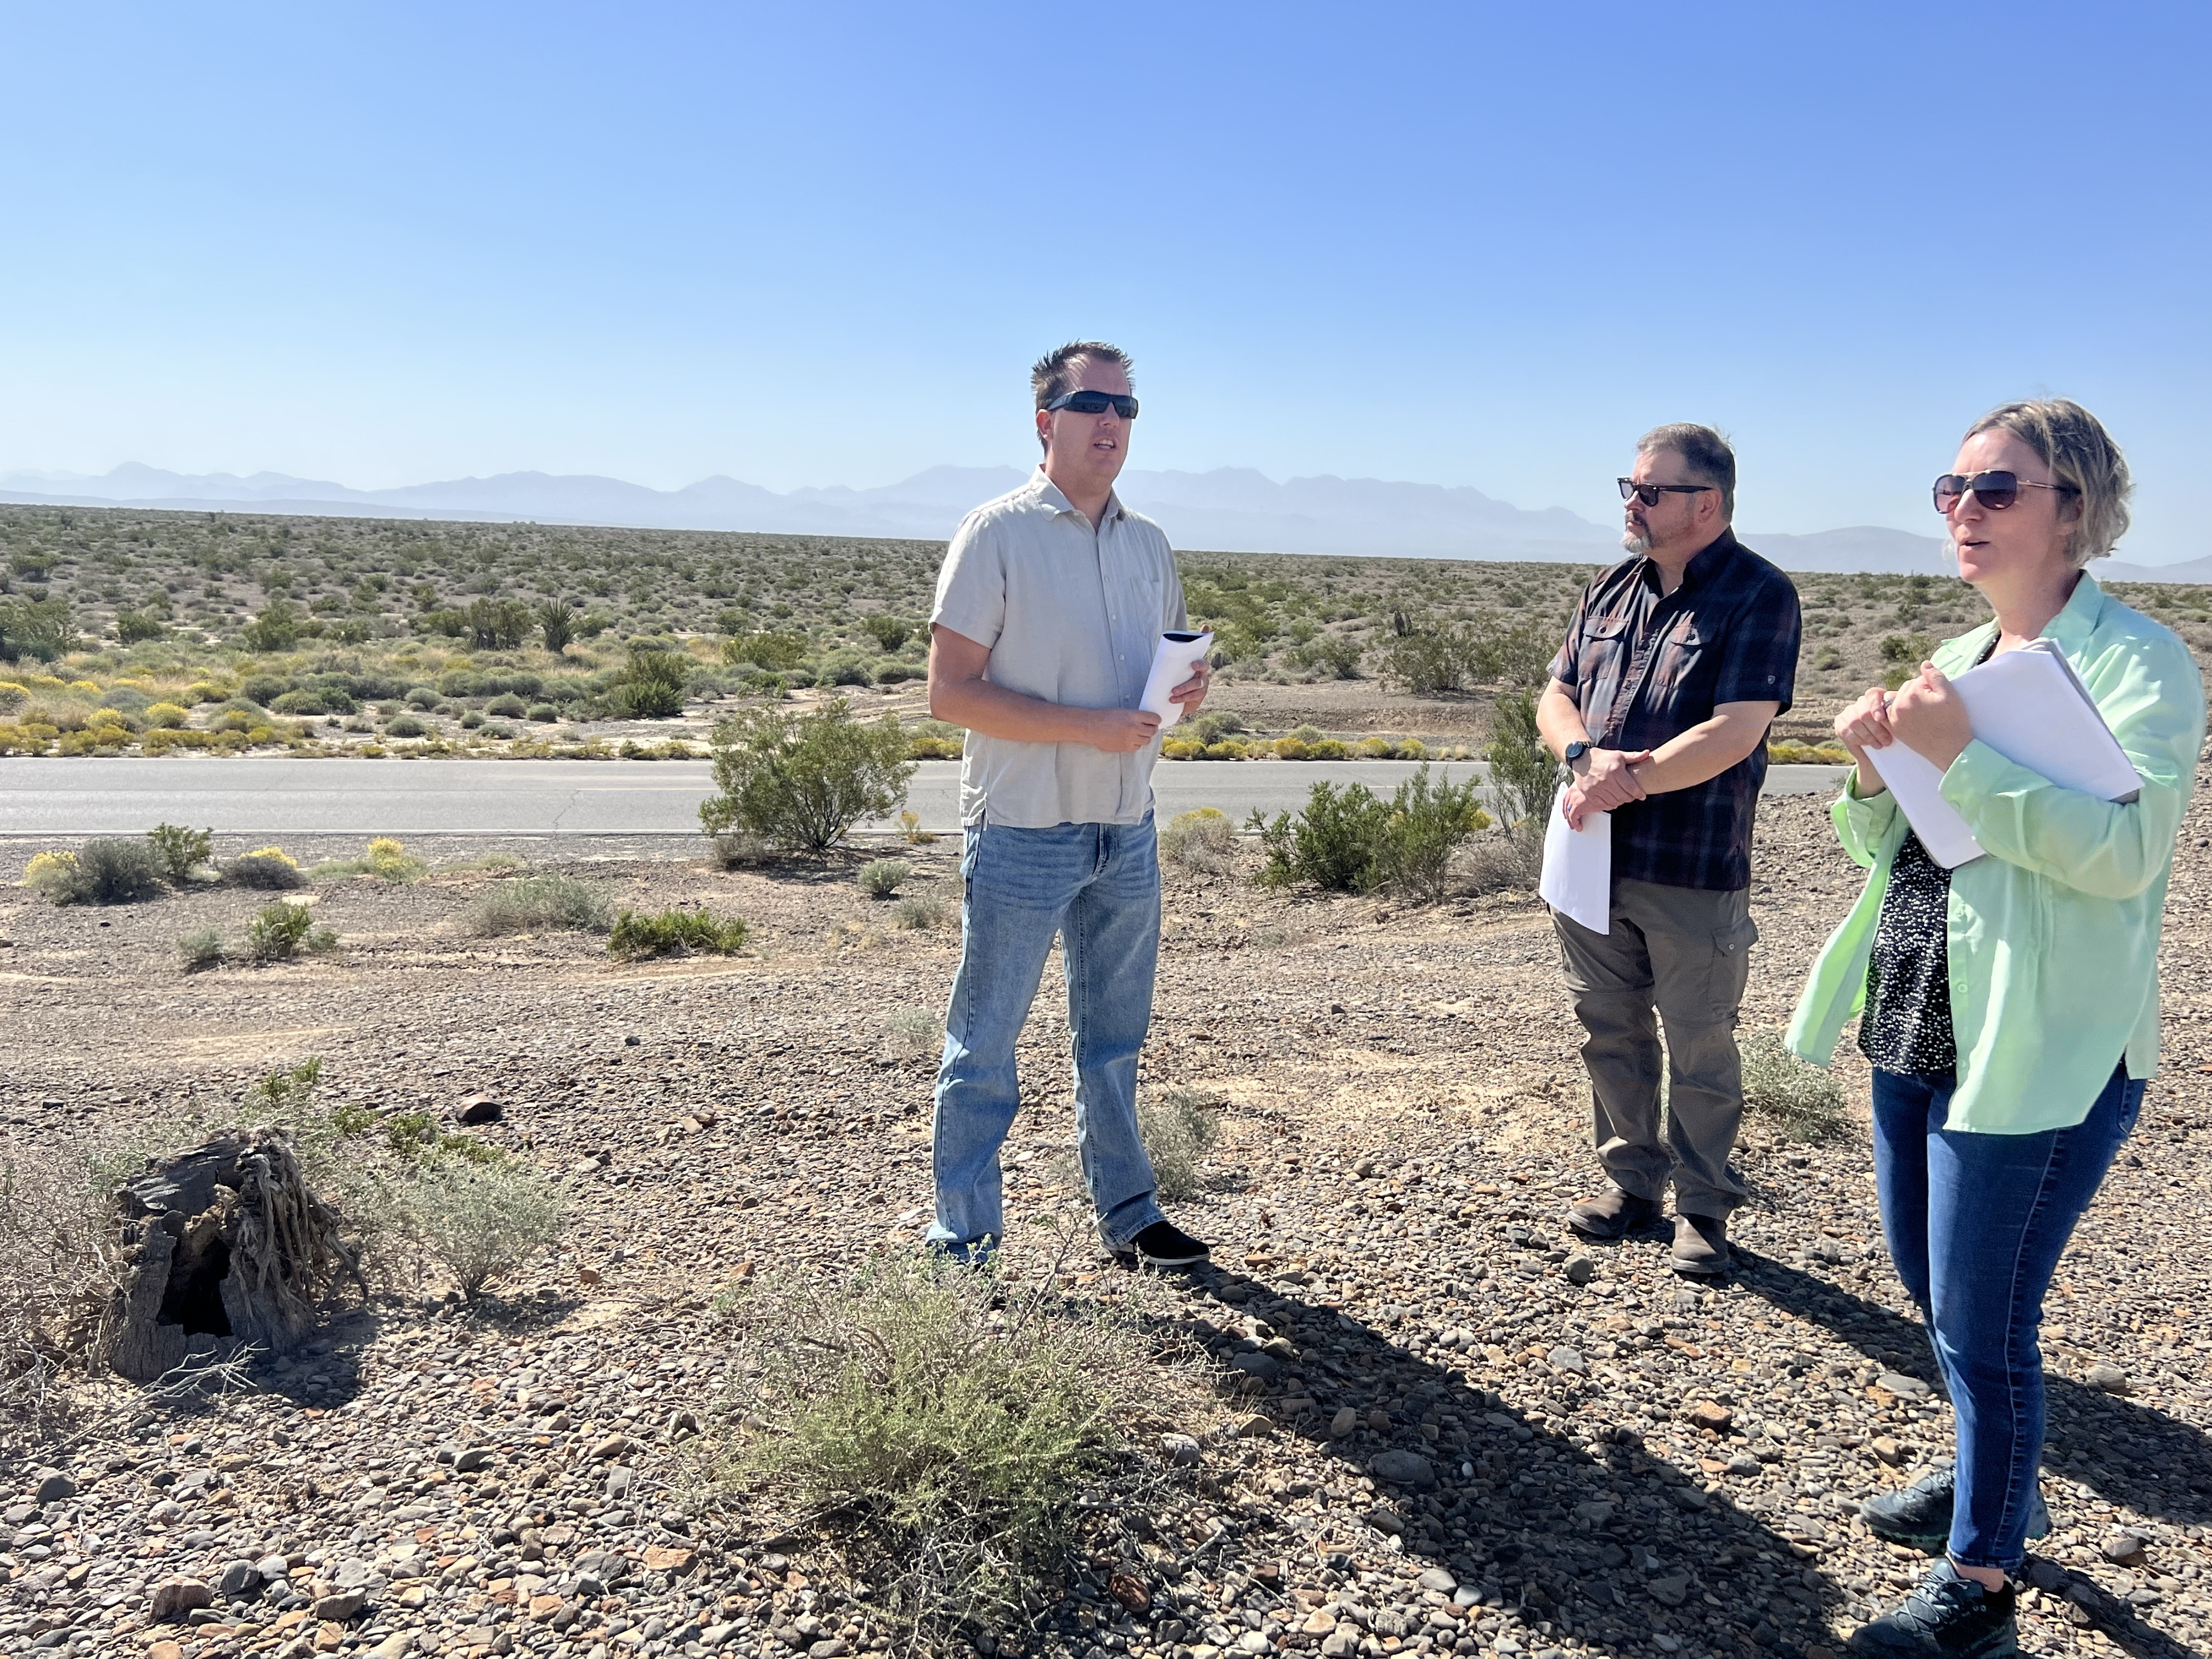 Nicholas Pay, manager of the Bureau of Land Management's Pahrump Field office, pictured left, and Beth Ransel, a BLM supervisory project manager, far right, at the site of the Golden Currant Solar Project.